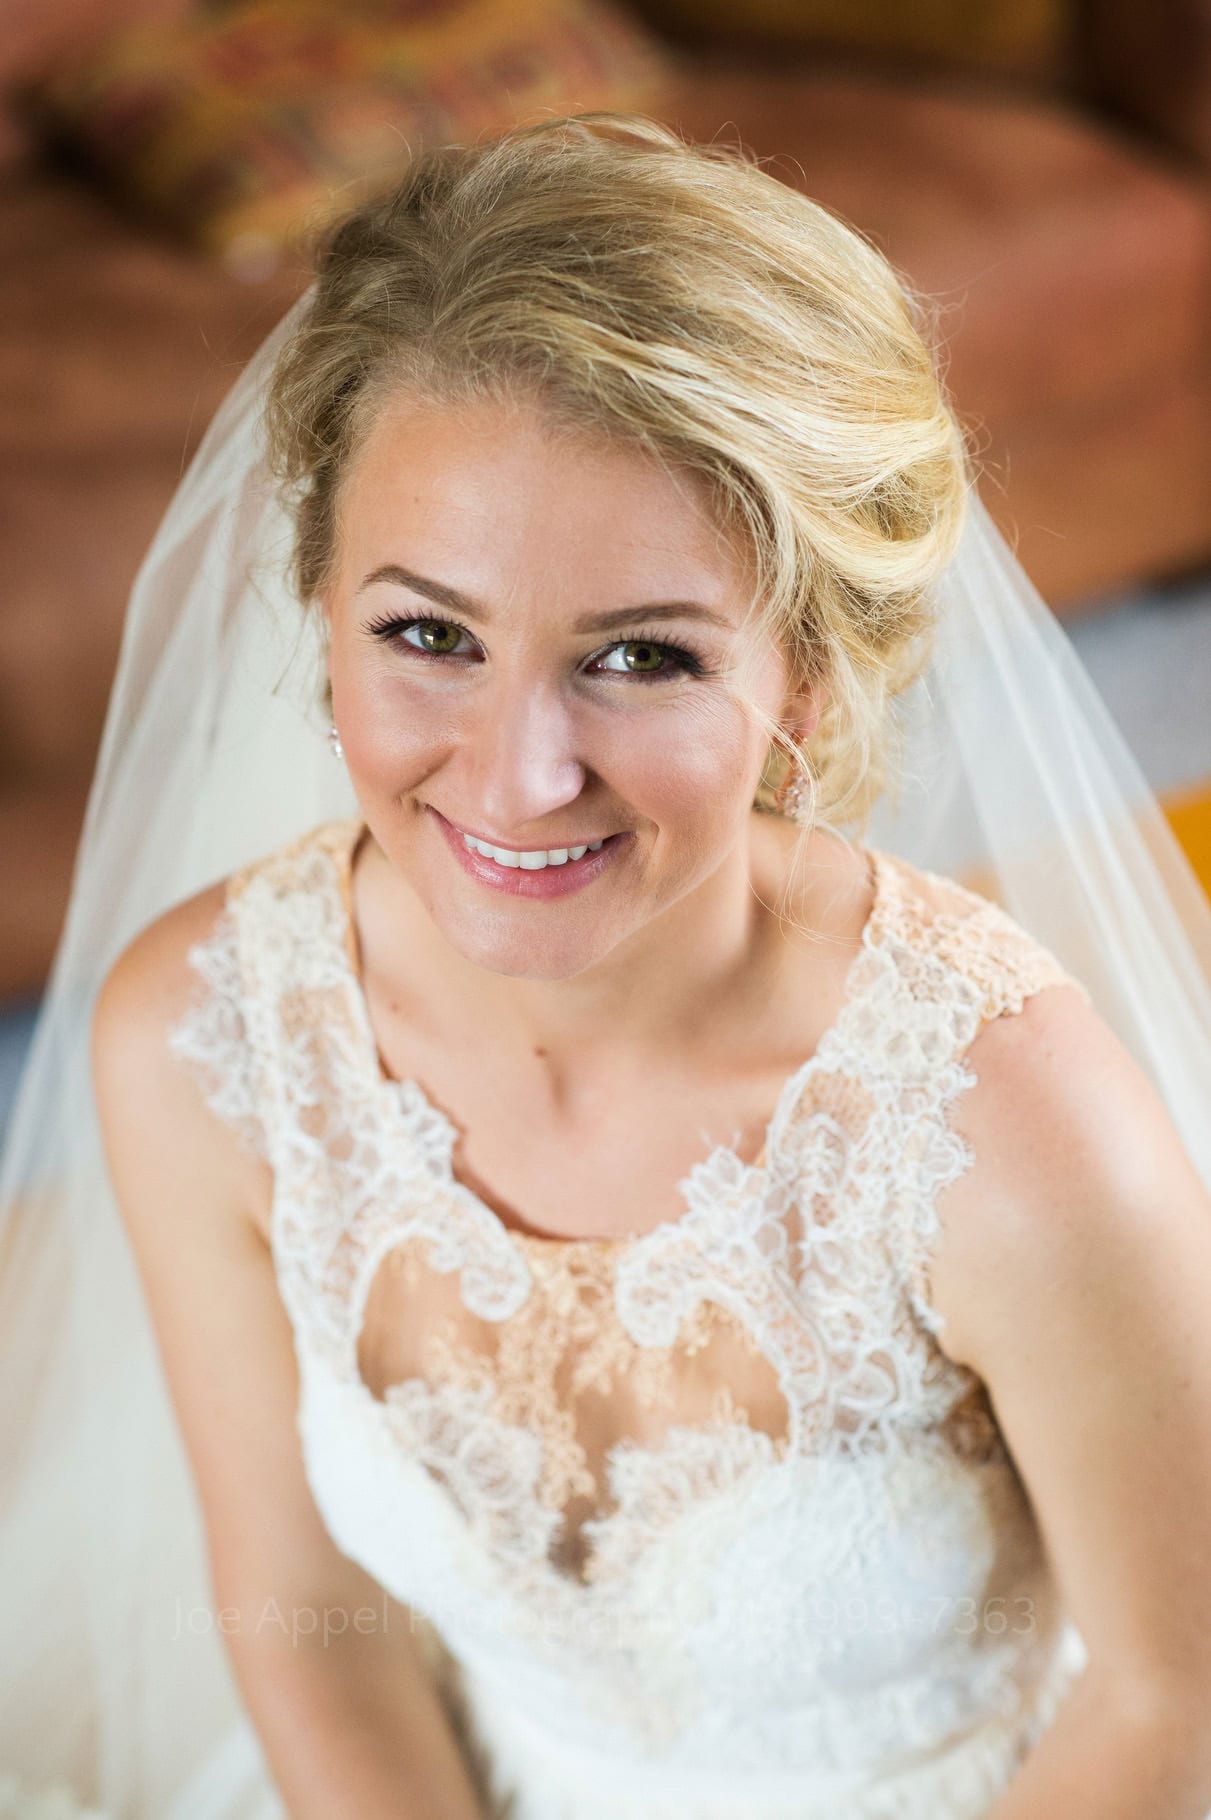 Closeup portrait of a blonde bride in a lacy dress with a veil.